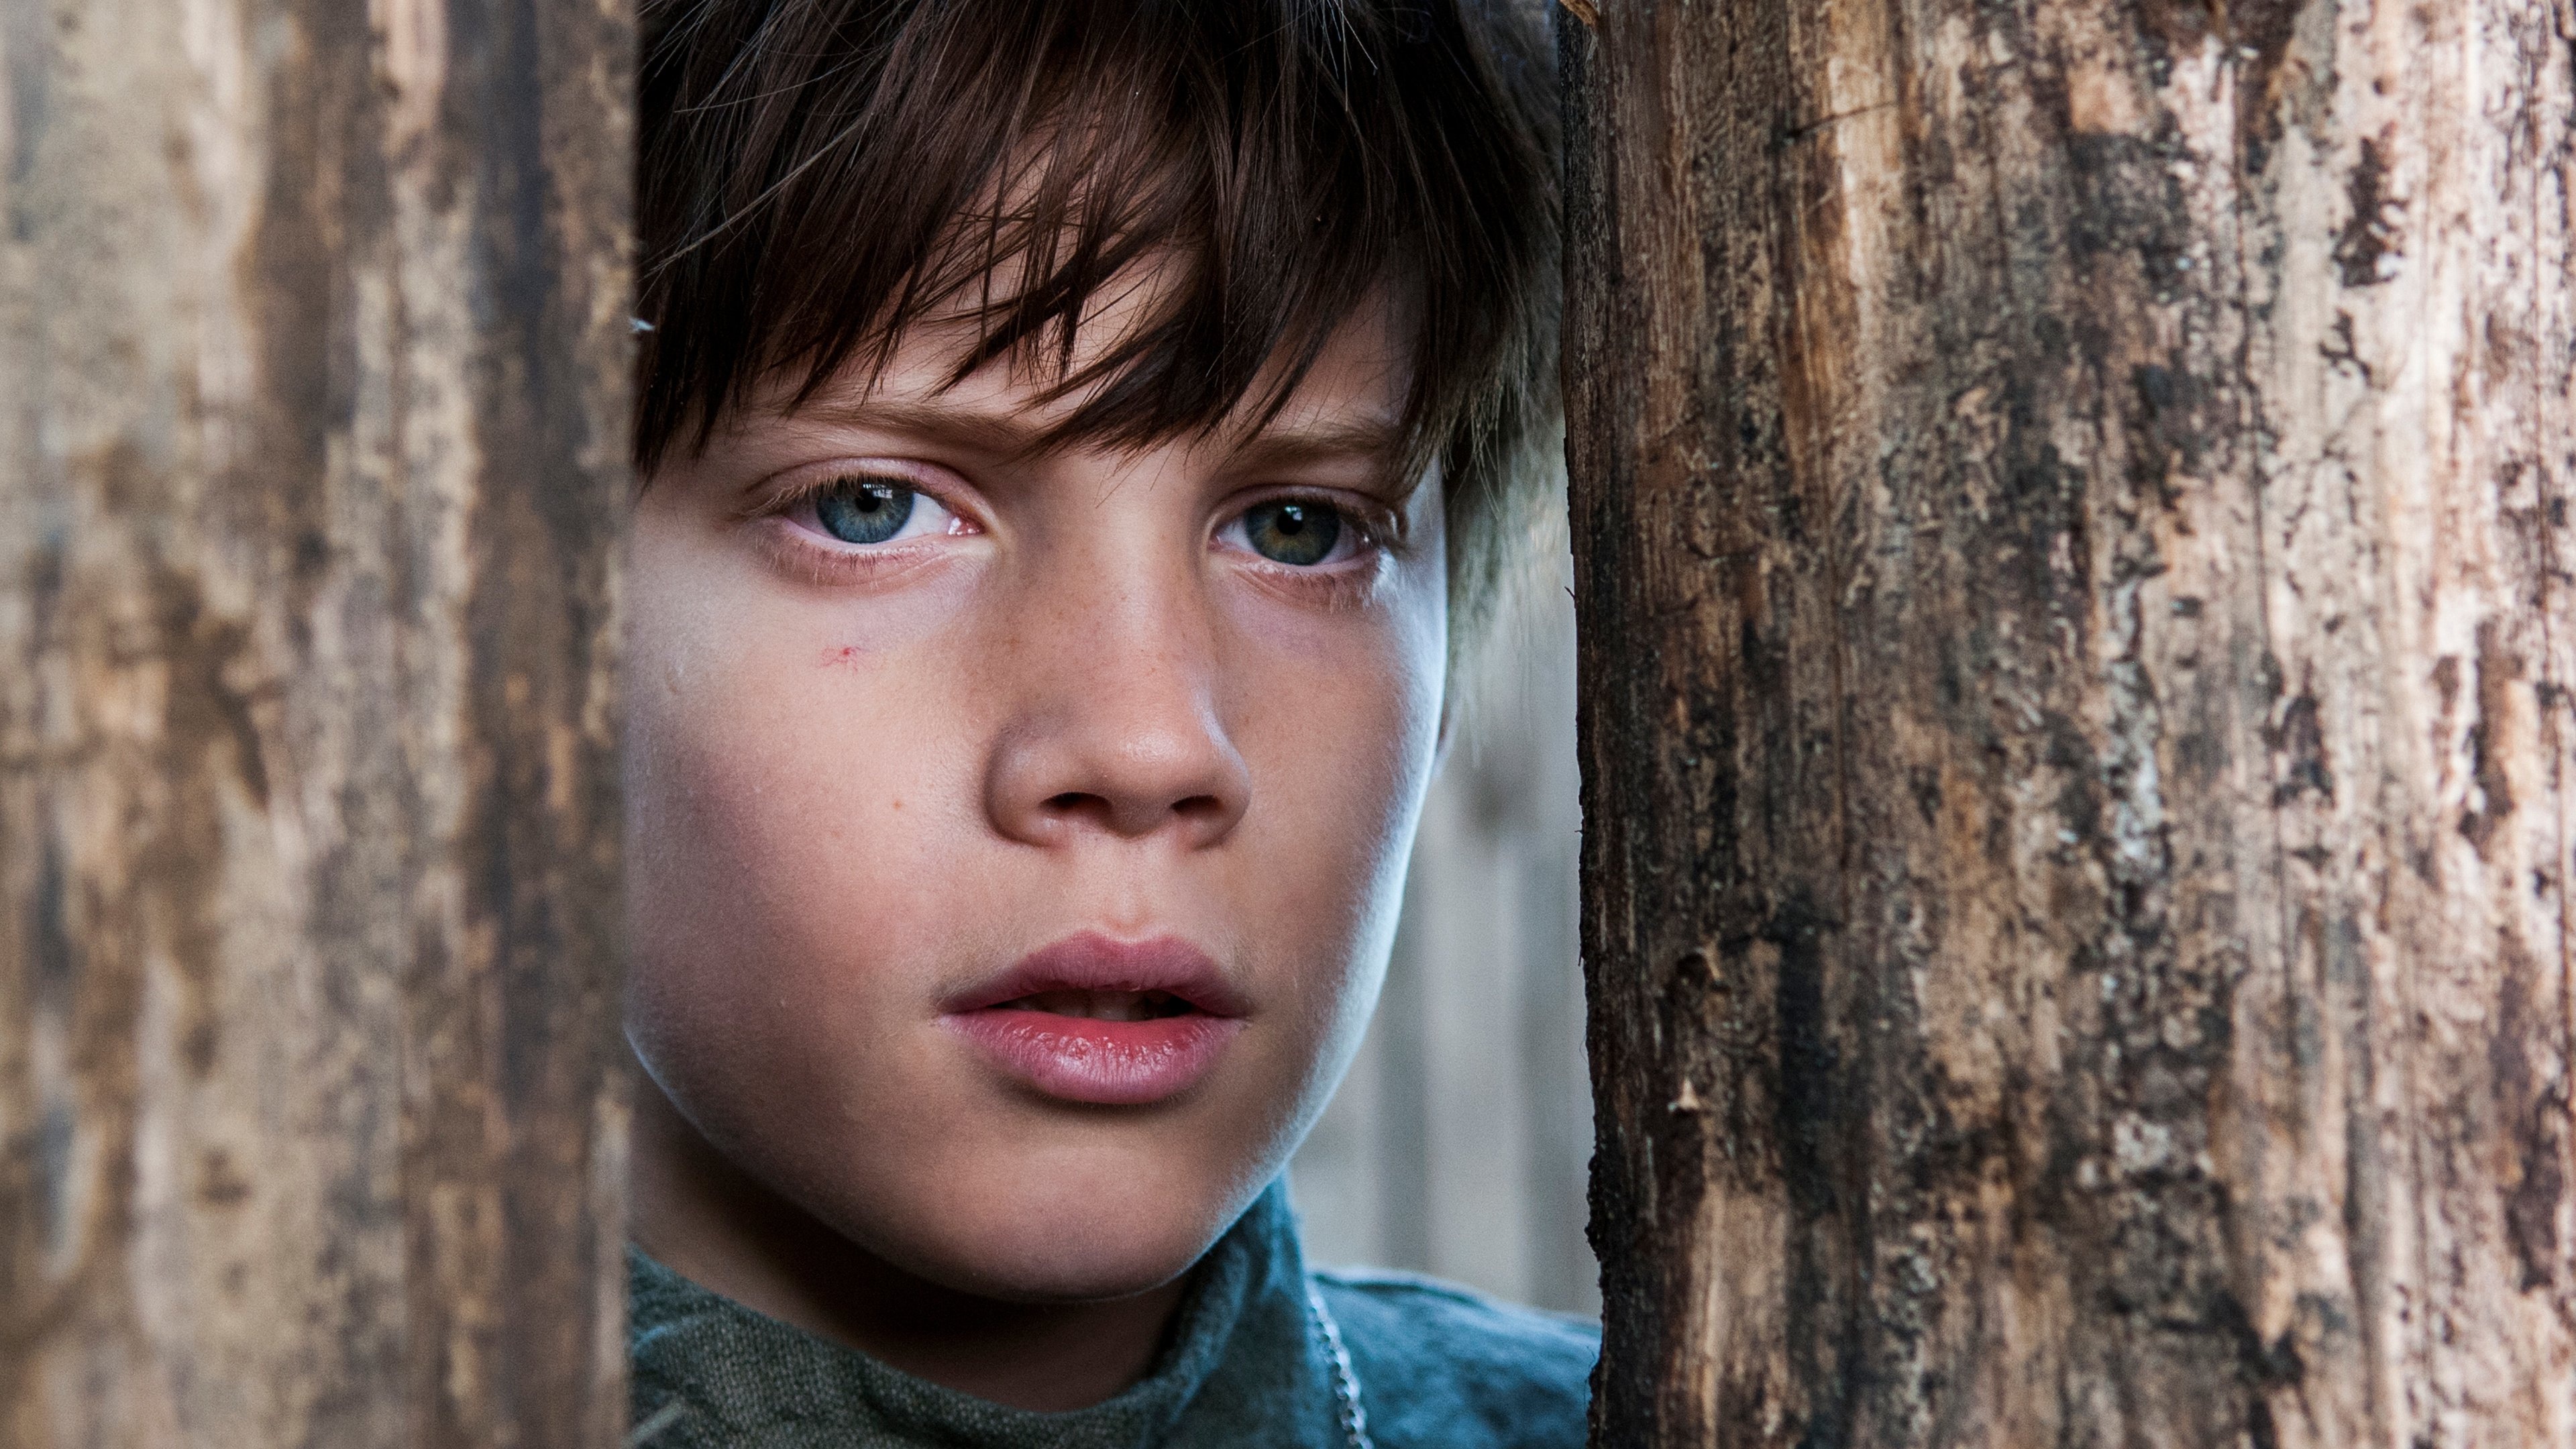 The Last Kingdom (TV Series): Tom Tailor, portraying the young Uhred. 3840x2160 4K Background.